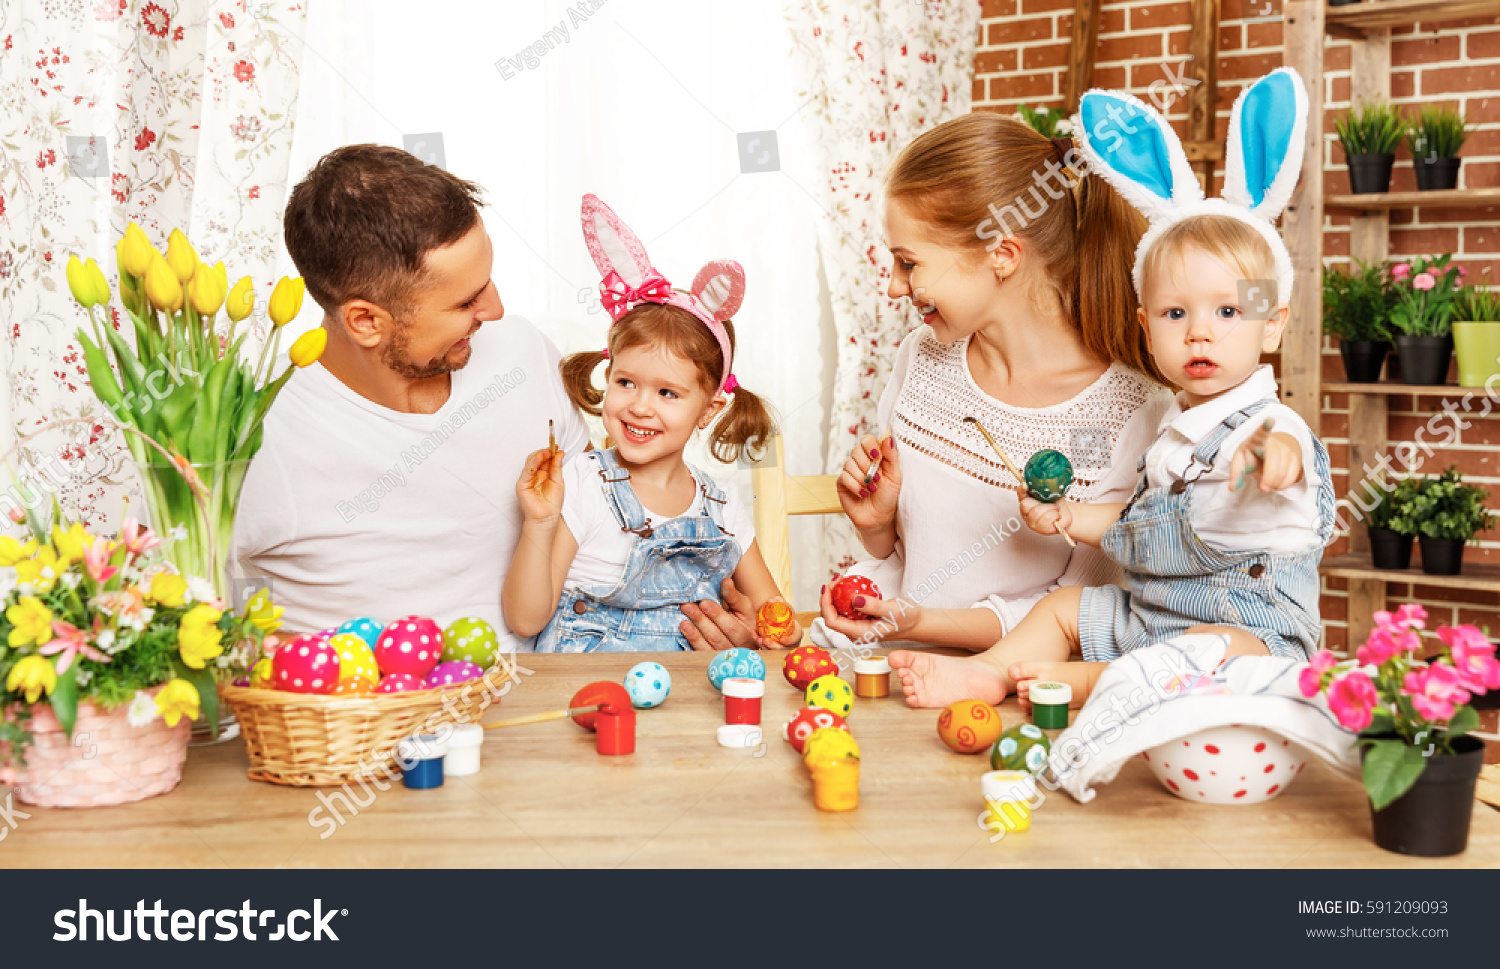 Happy easter! family mother, father and children having fun paint and decorate eggs for holiday
 #591209093